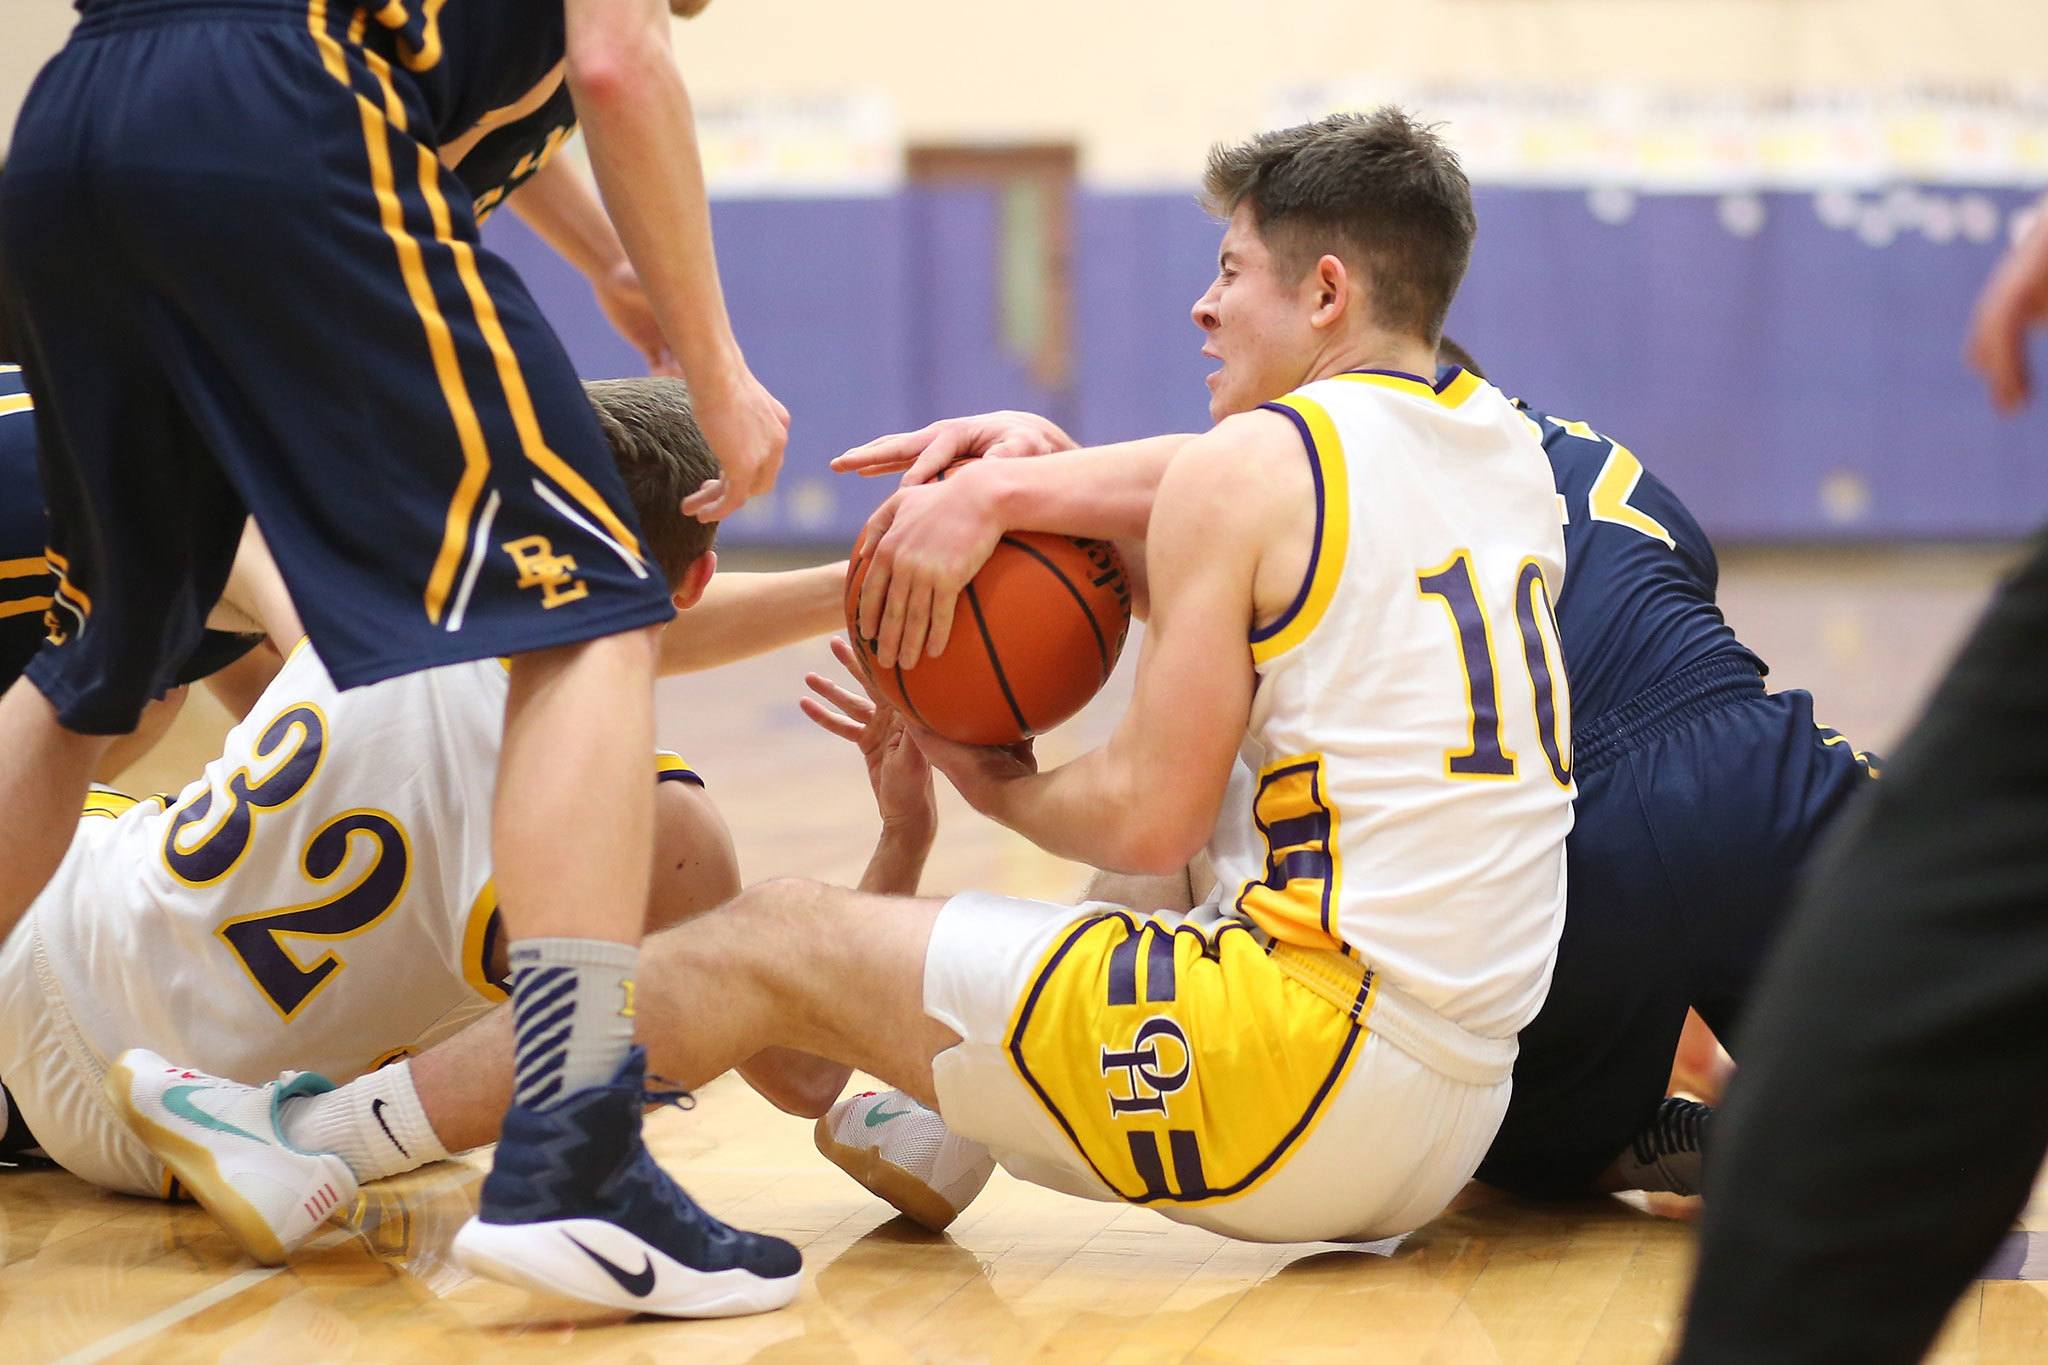 JJ Mitchell (10) and Adam Nelson (32) scrap for a loose ball. (Photo by John Fisken)